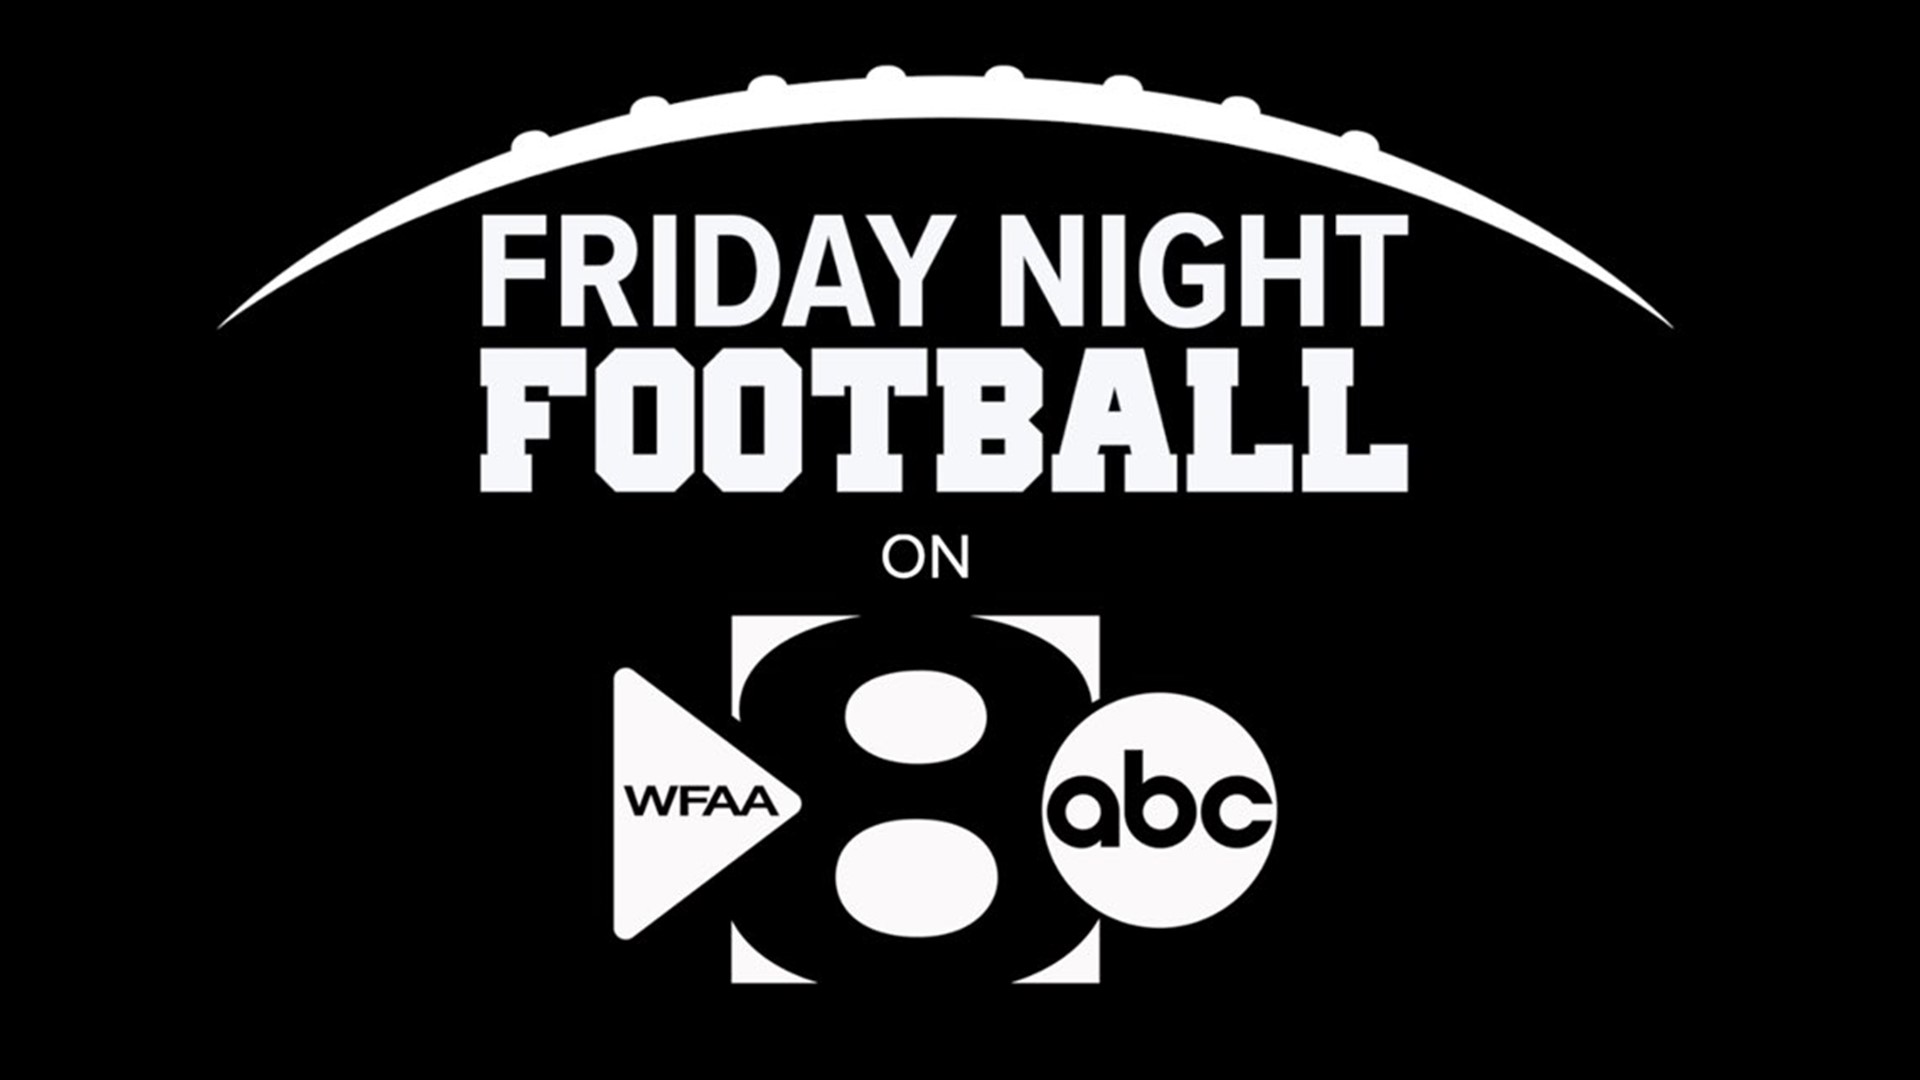 2023 will mark the sixth year of WFAA streaming broadcasts of local high school football games. This season features 11 schools never before featured on FNF.